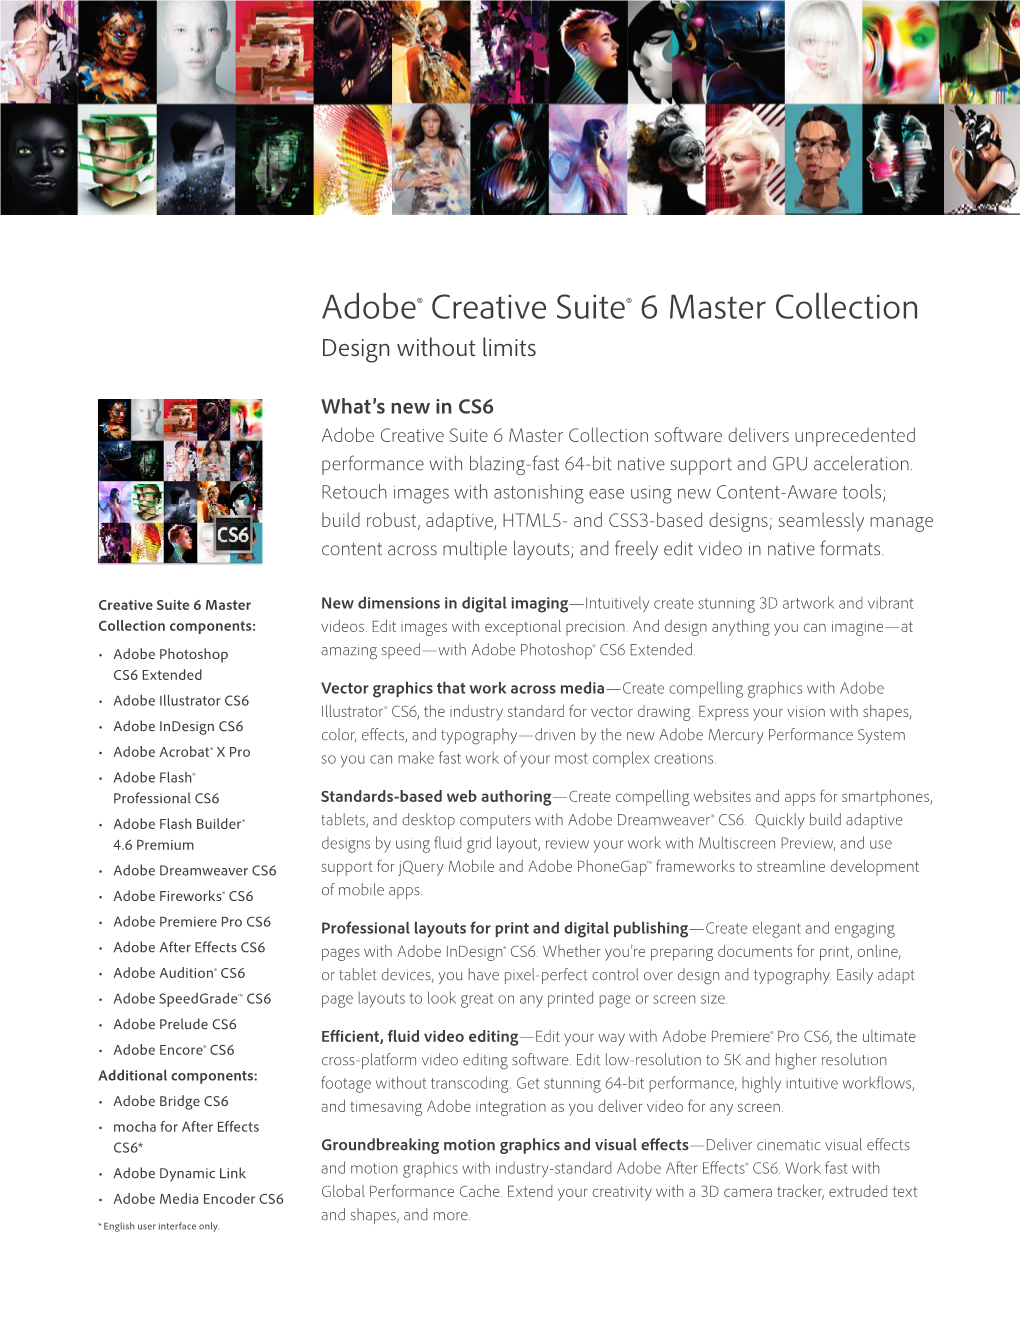 Adobe CS6 Master Collection Suite Overview